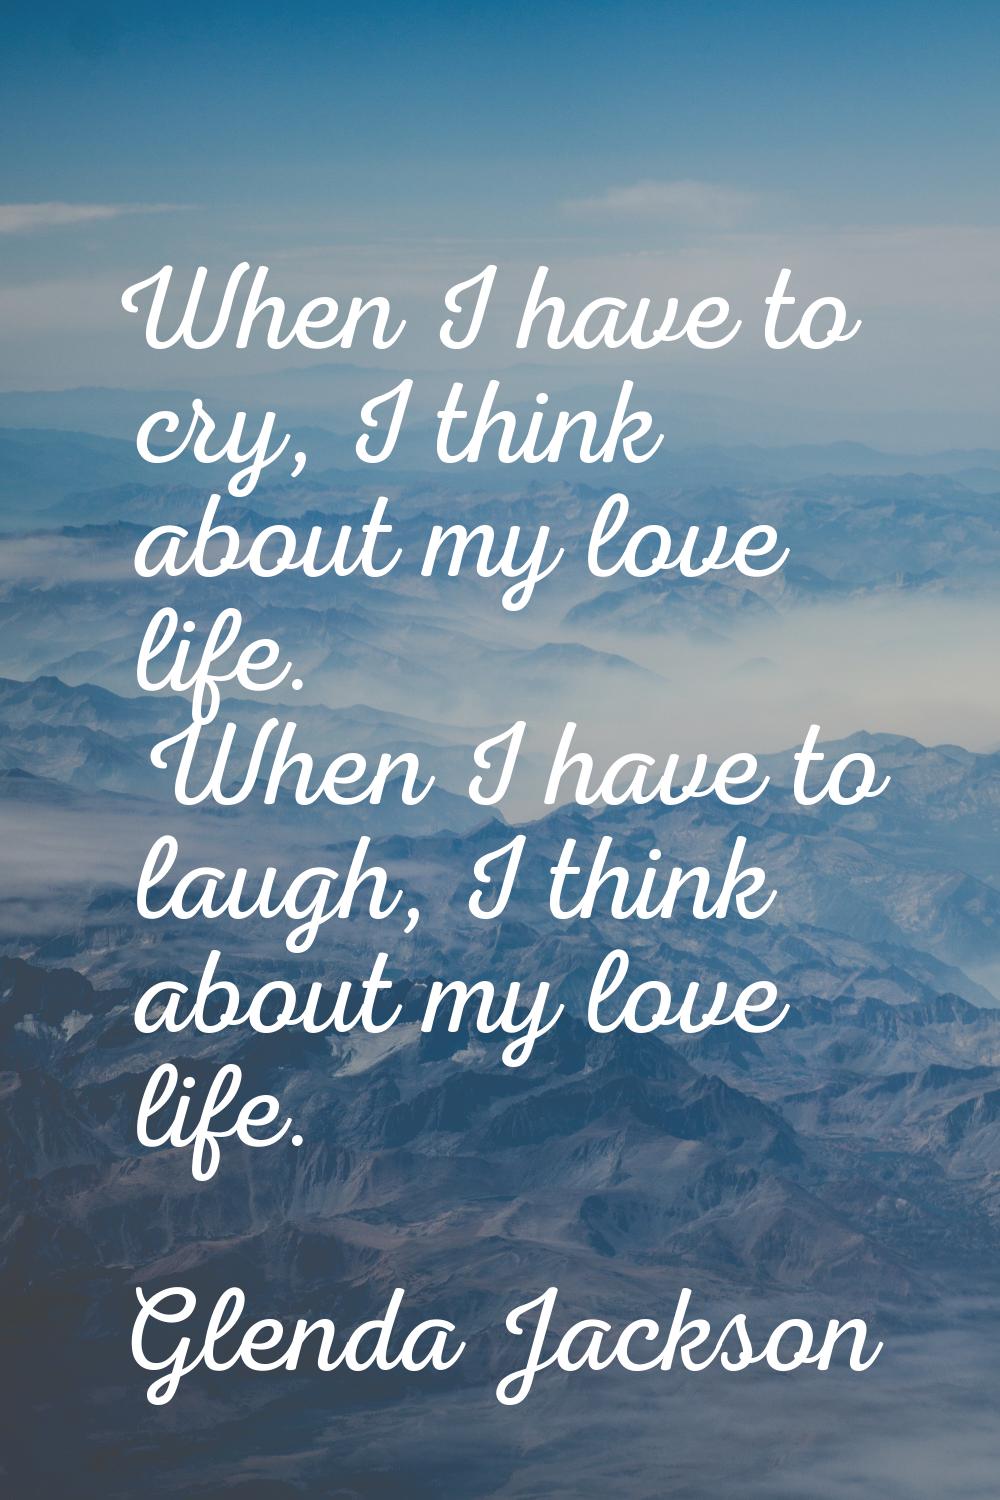 When I have to cry, I think about my love life. When I have to laugh, I think about my love life.